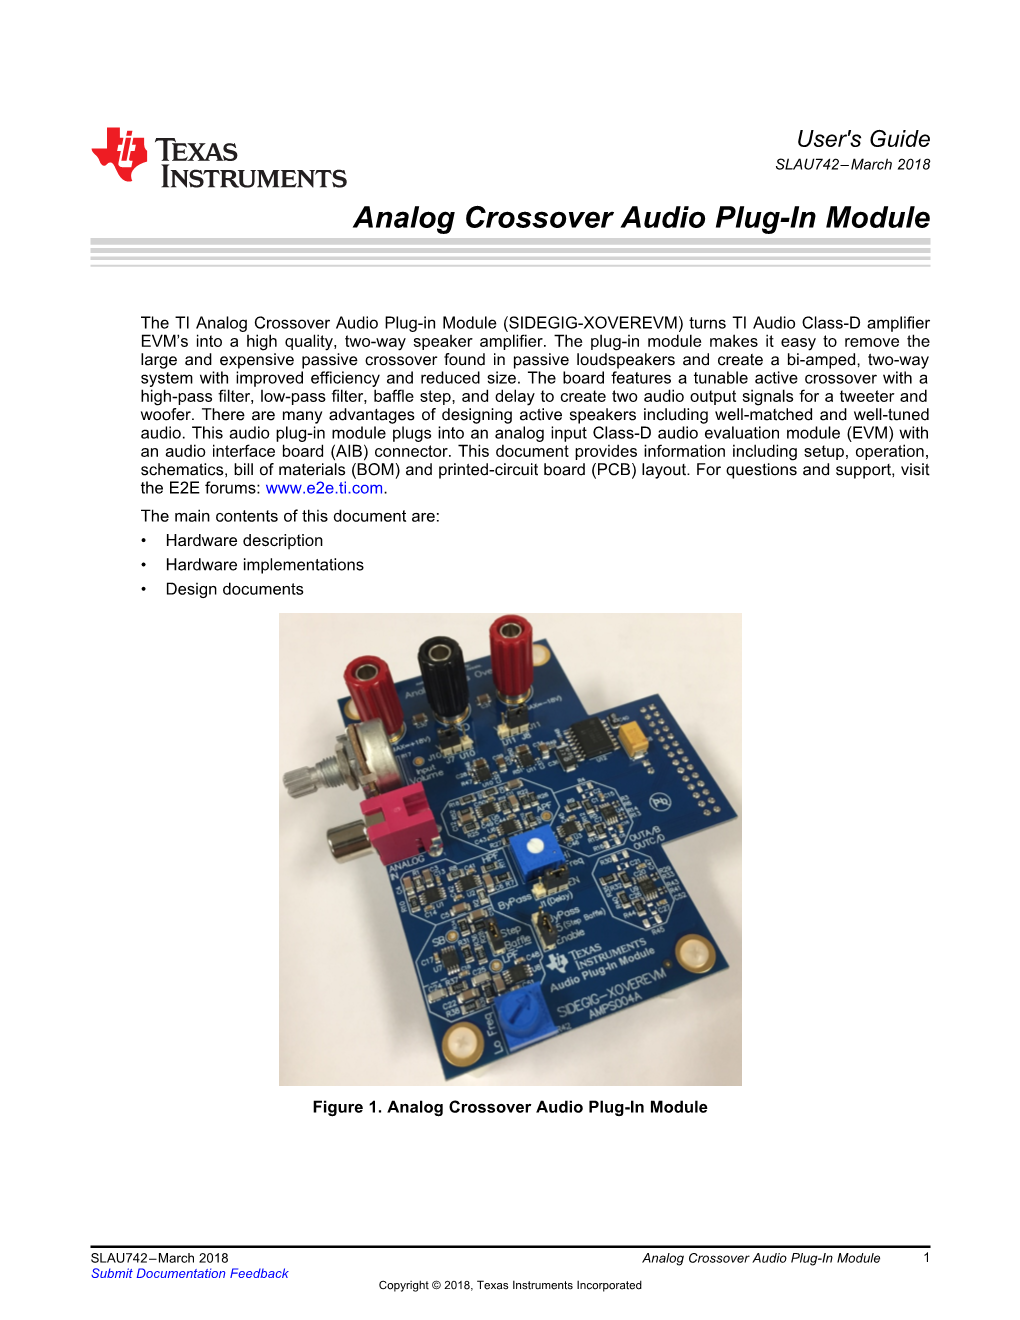 Analog Crossover Audio Plug-In Module User's Guide